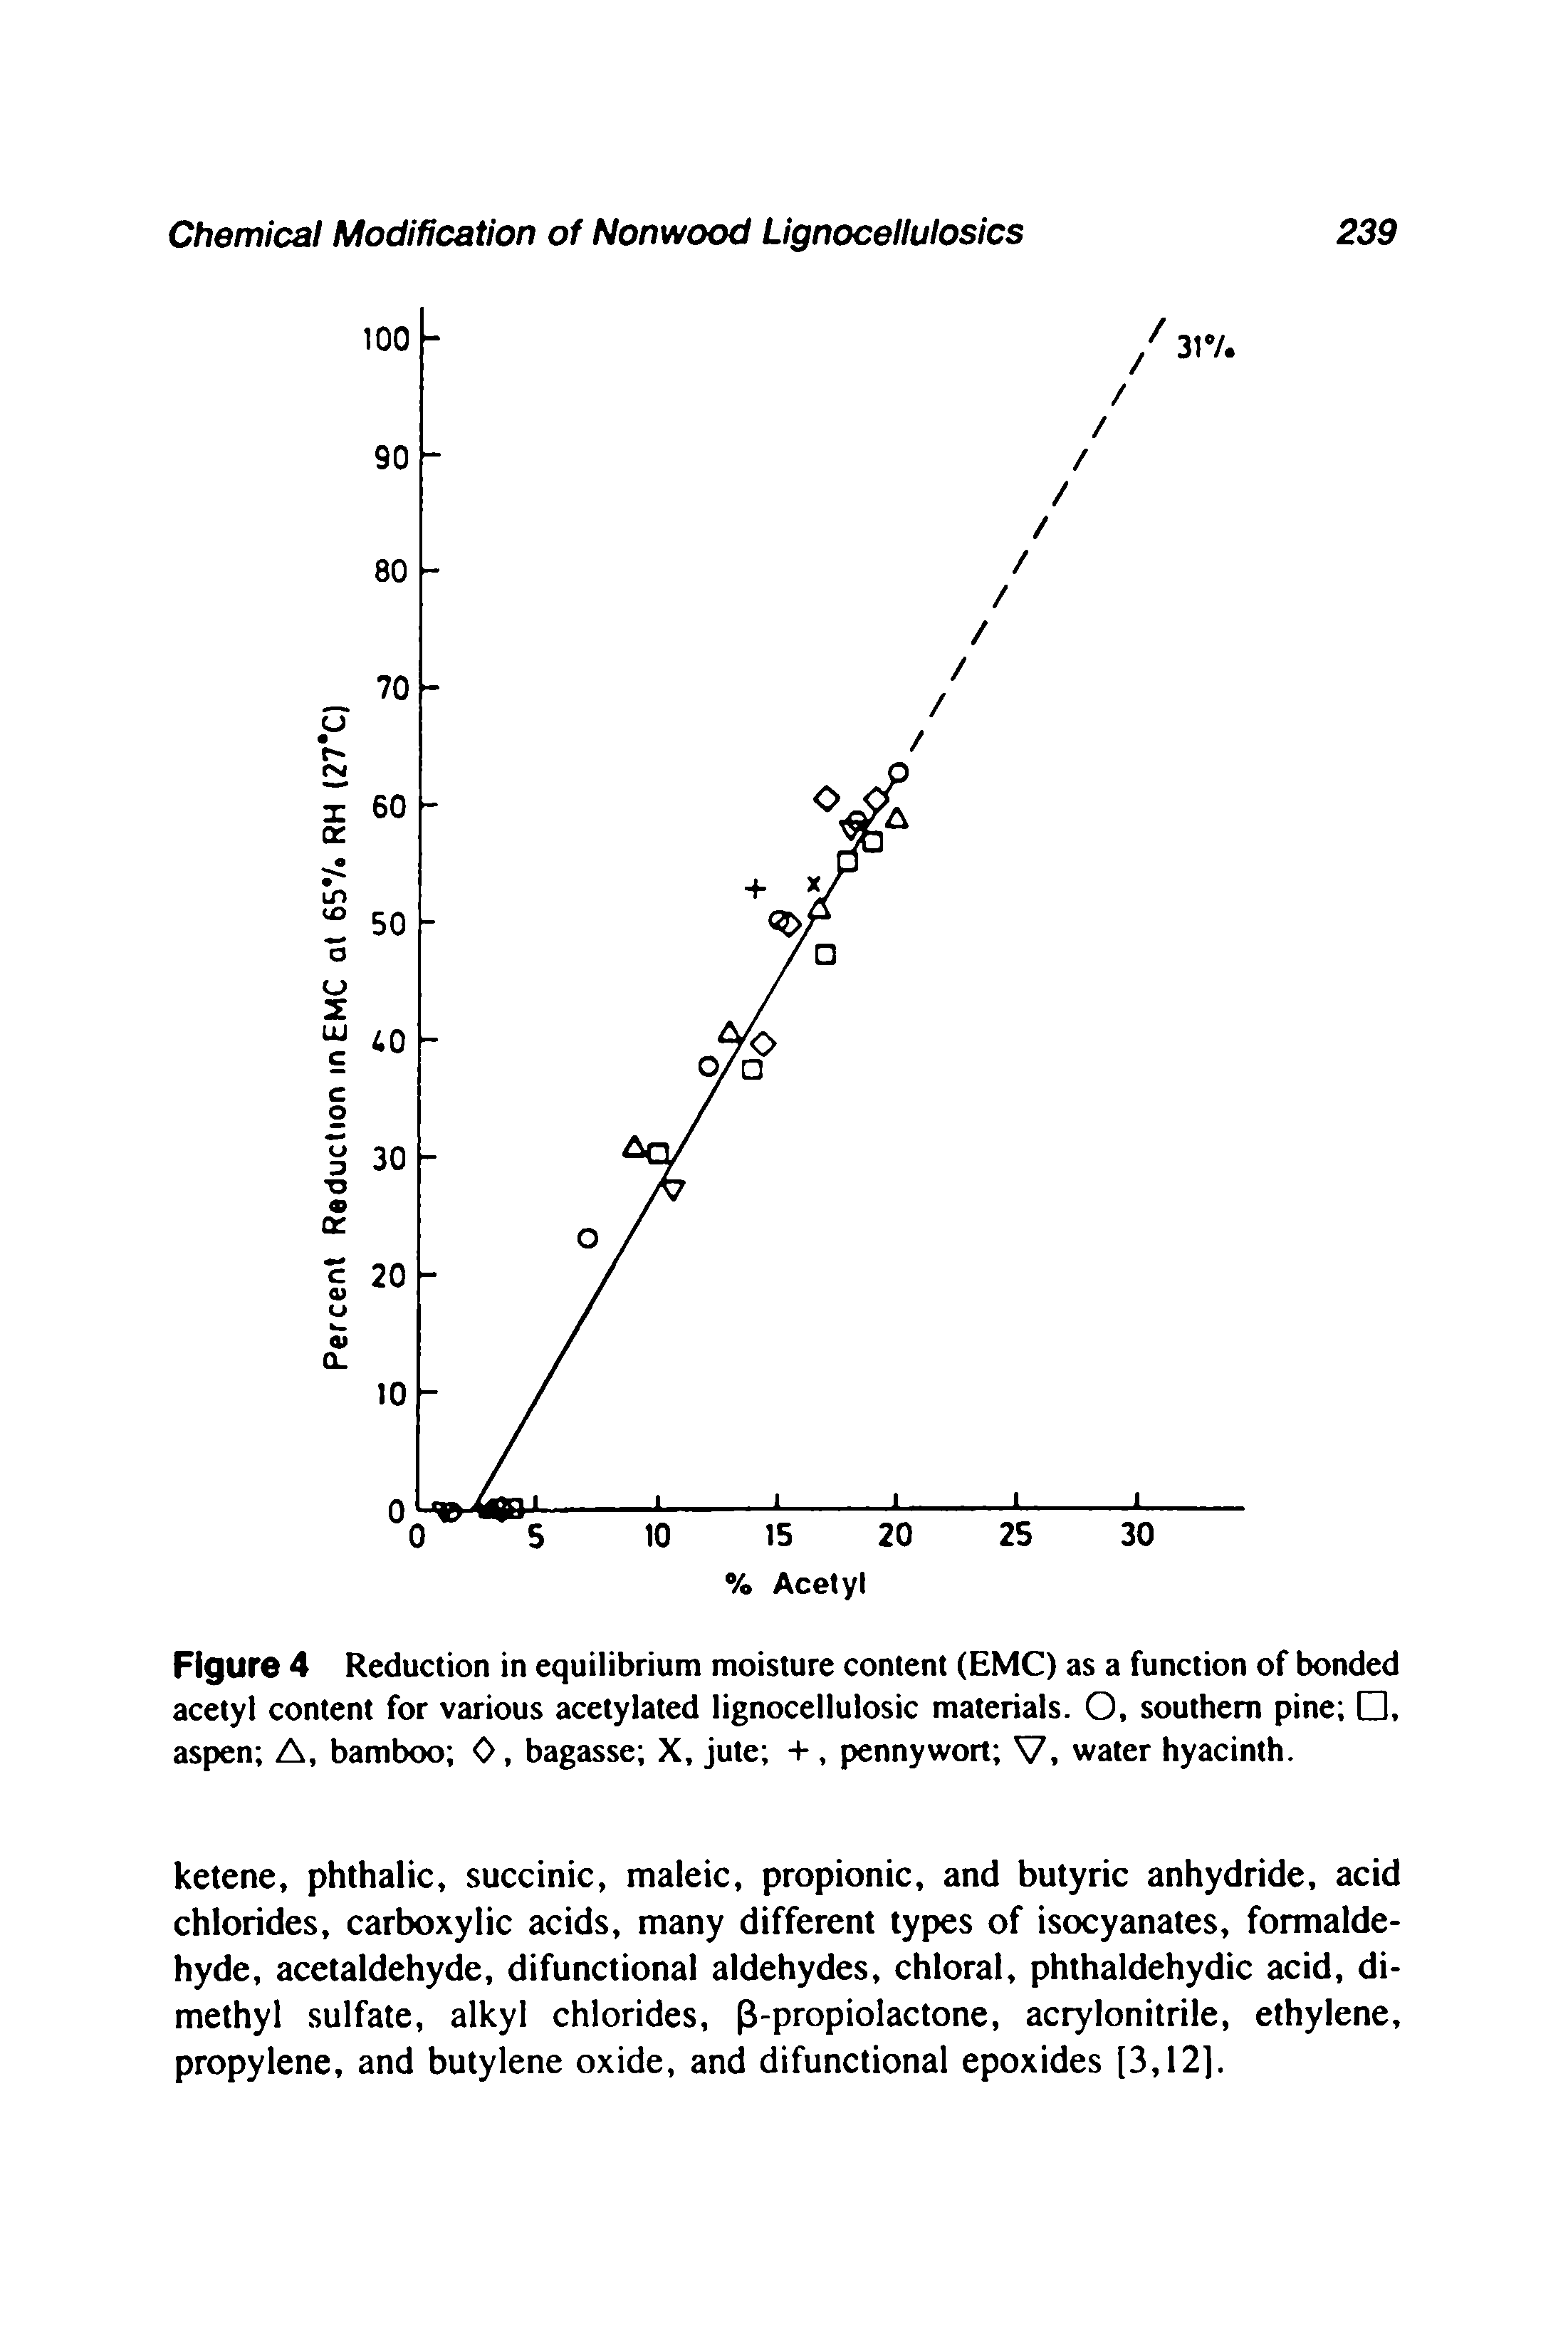 Figure 4 Reduction in equilibrium moisture content (EMC) as a function of bonded acetyl content for various acetylated lignocellulosic materials. O, southern pine , aspen A, bamboo 0, bagasse X, jute +, pennywort V, water hyacinth.